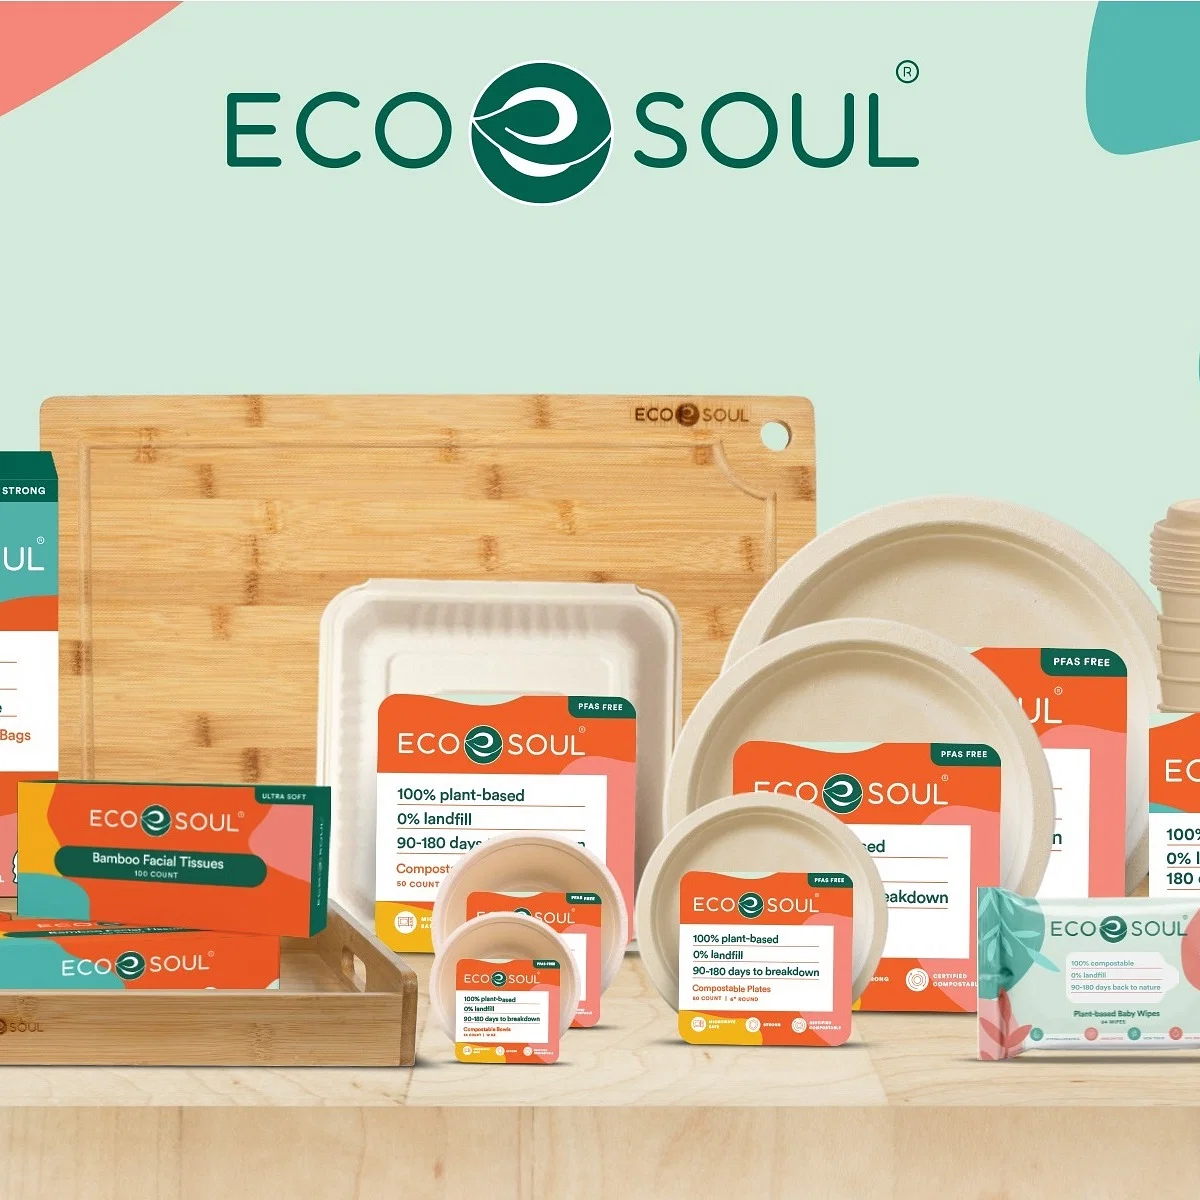 EcoSoul Home Inc. Secures $10M in Series A Funding Round Led by Accel and Singh Capital Partners.